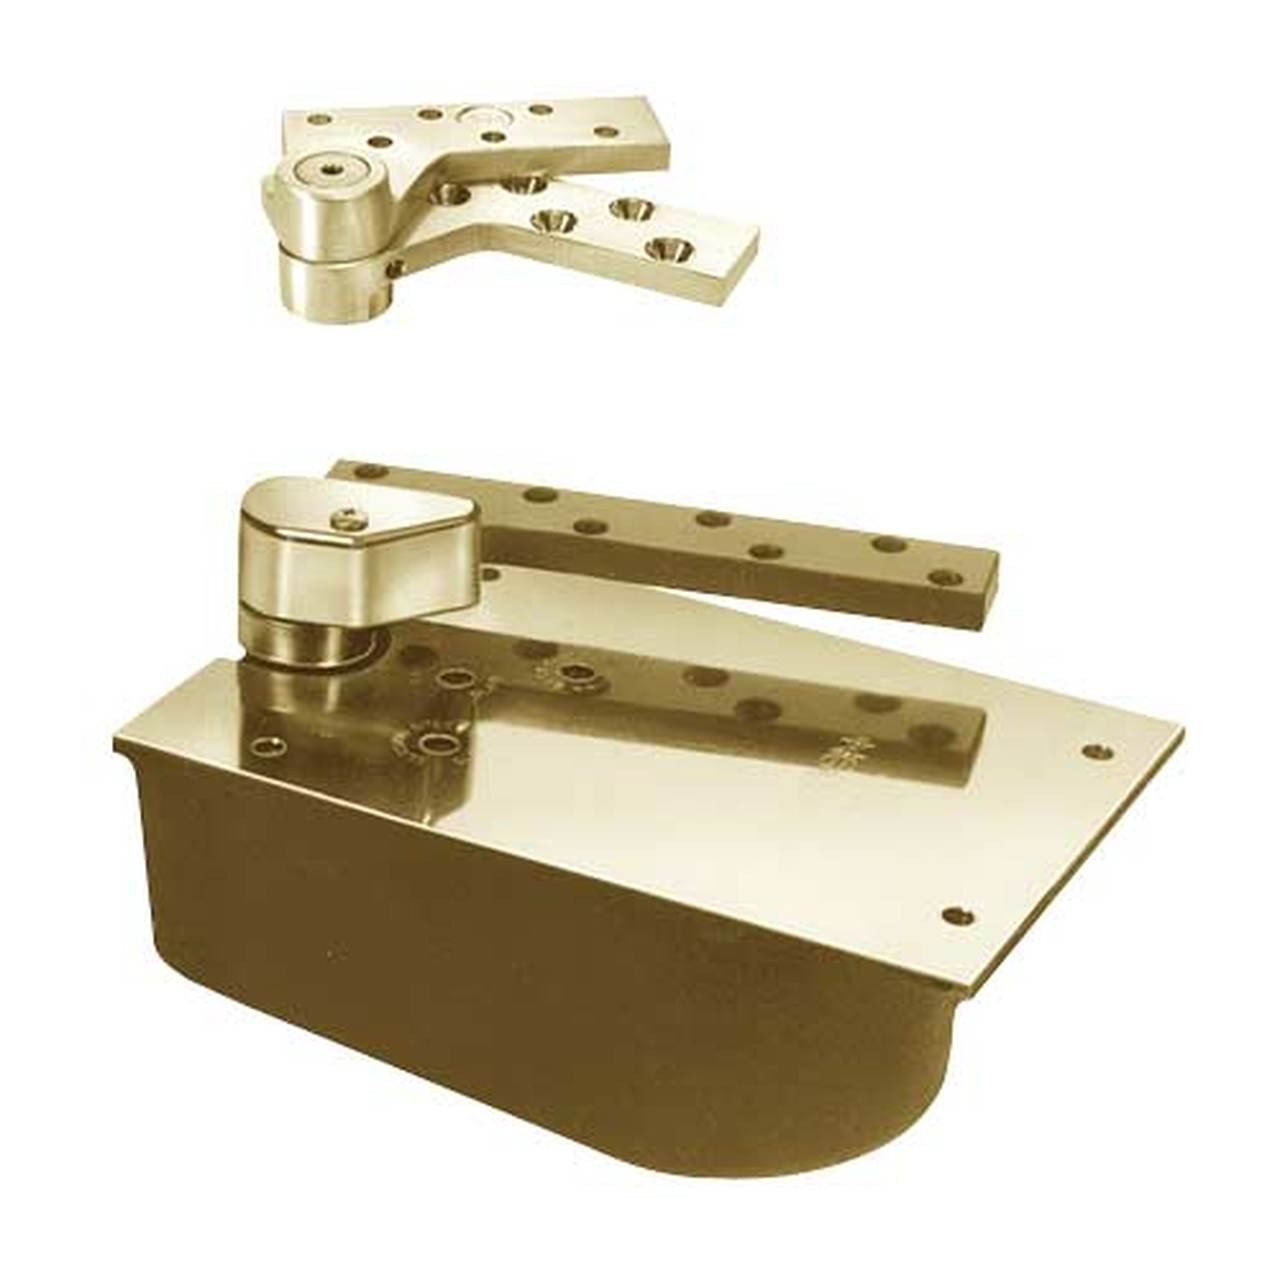 L27-85N-LFP-LCC-LH-1-3/4-606 Rixson 27 Series Extra Heavy Duty Lead Lined Offset Floor Closer in Satin Brass Finish